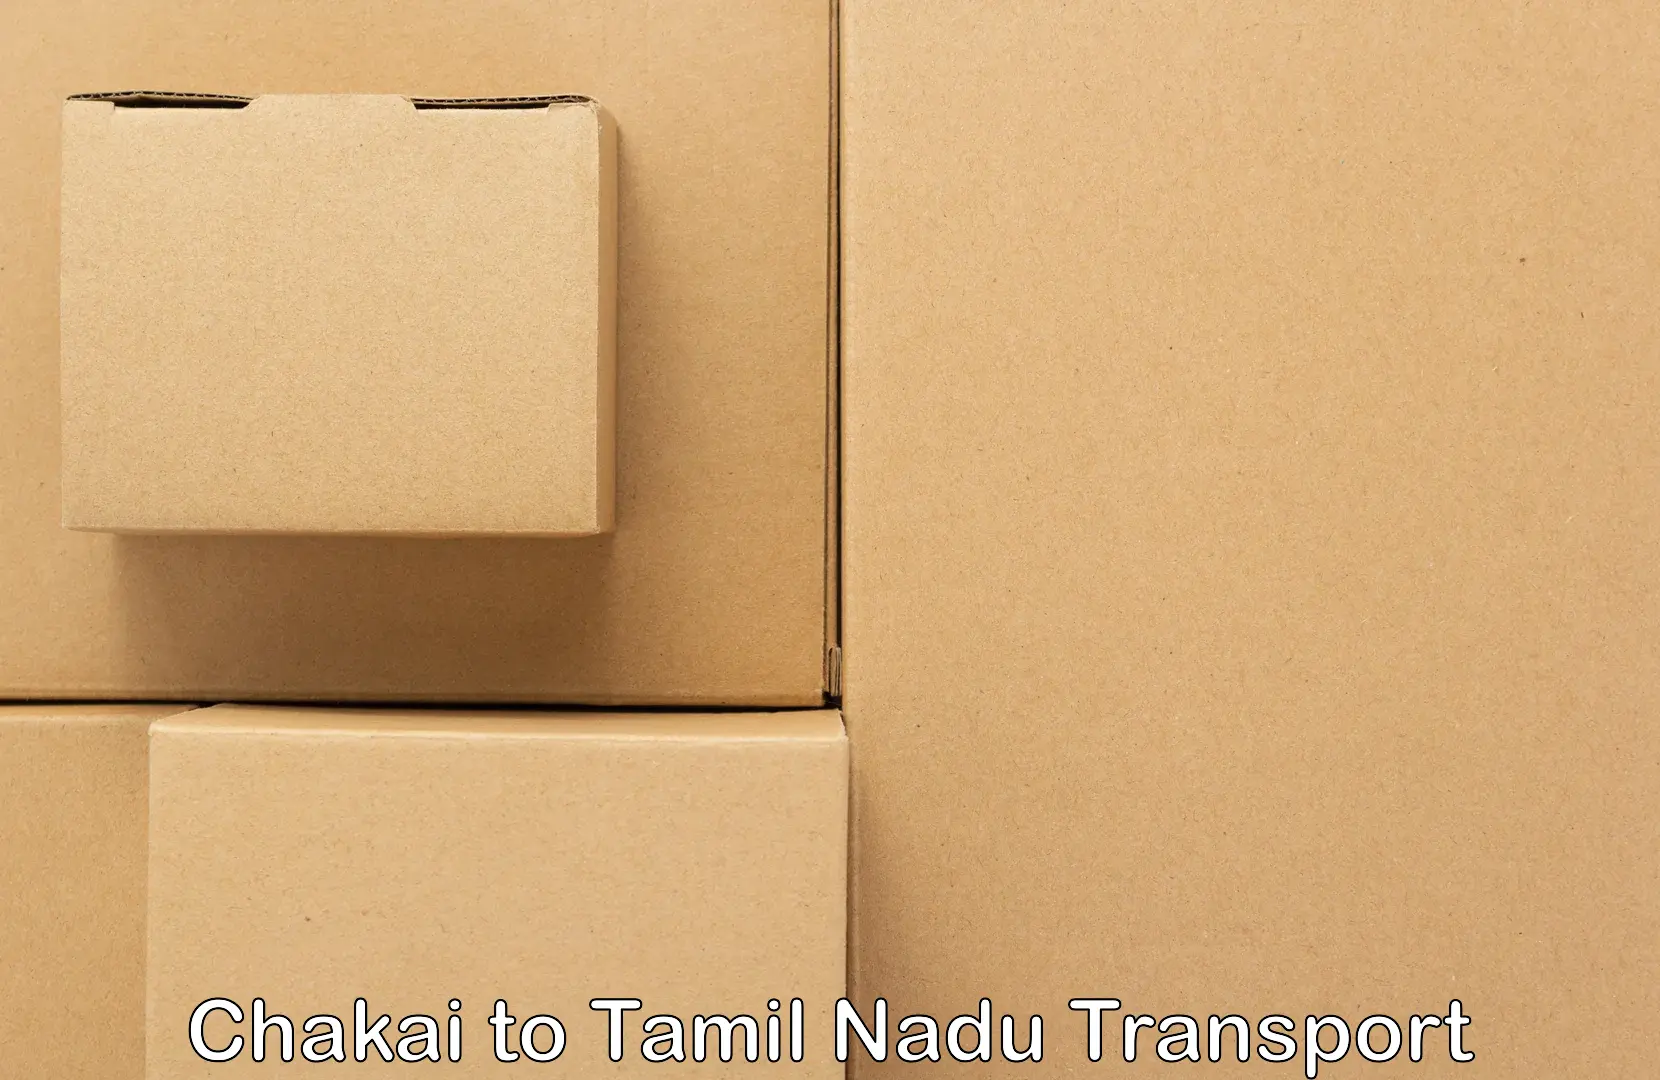 Shipping partner Chakai to SRM Institute of Science and Technology Chennai